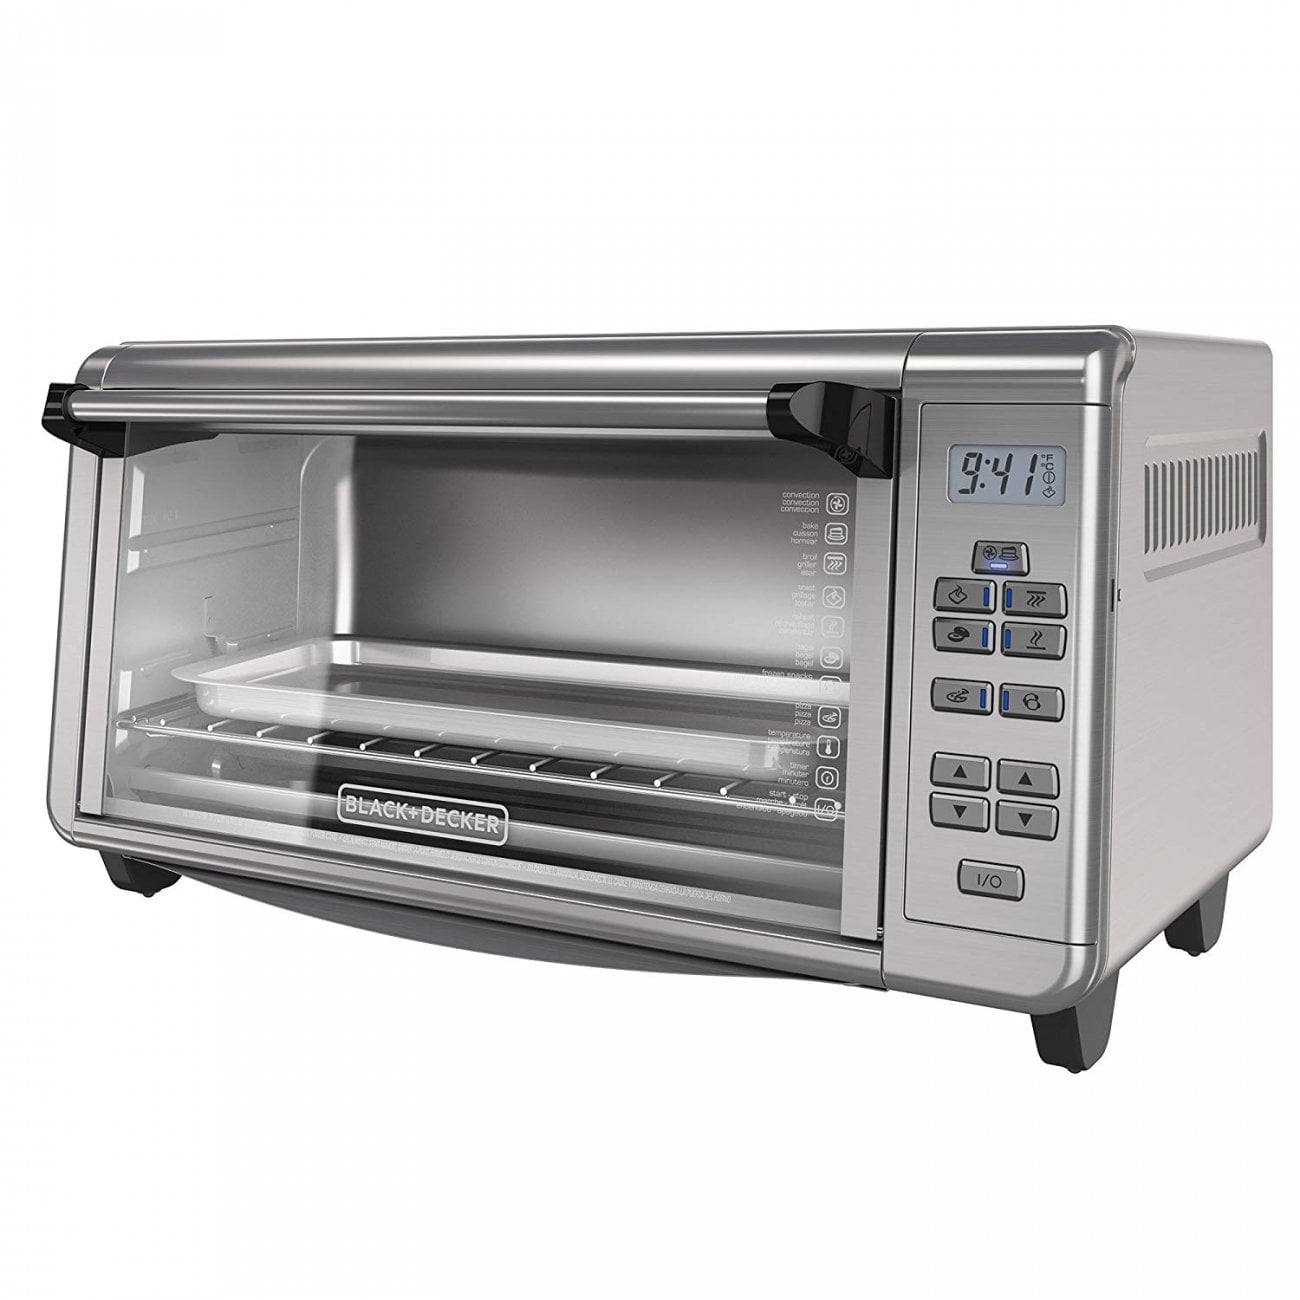  casaWare 11 x 9 x 2-inch Toaster Oven Ultimate Series